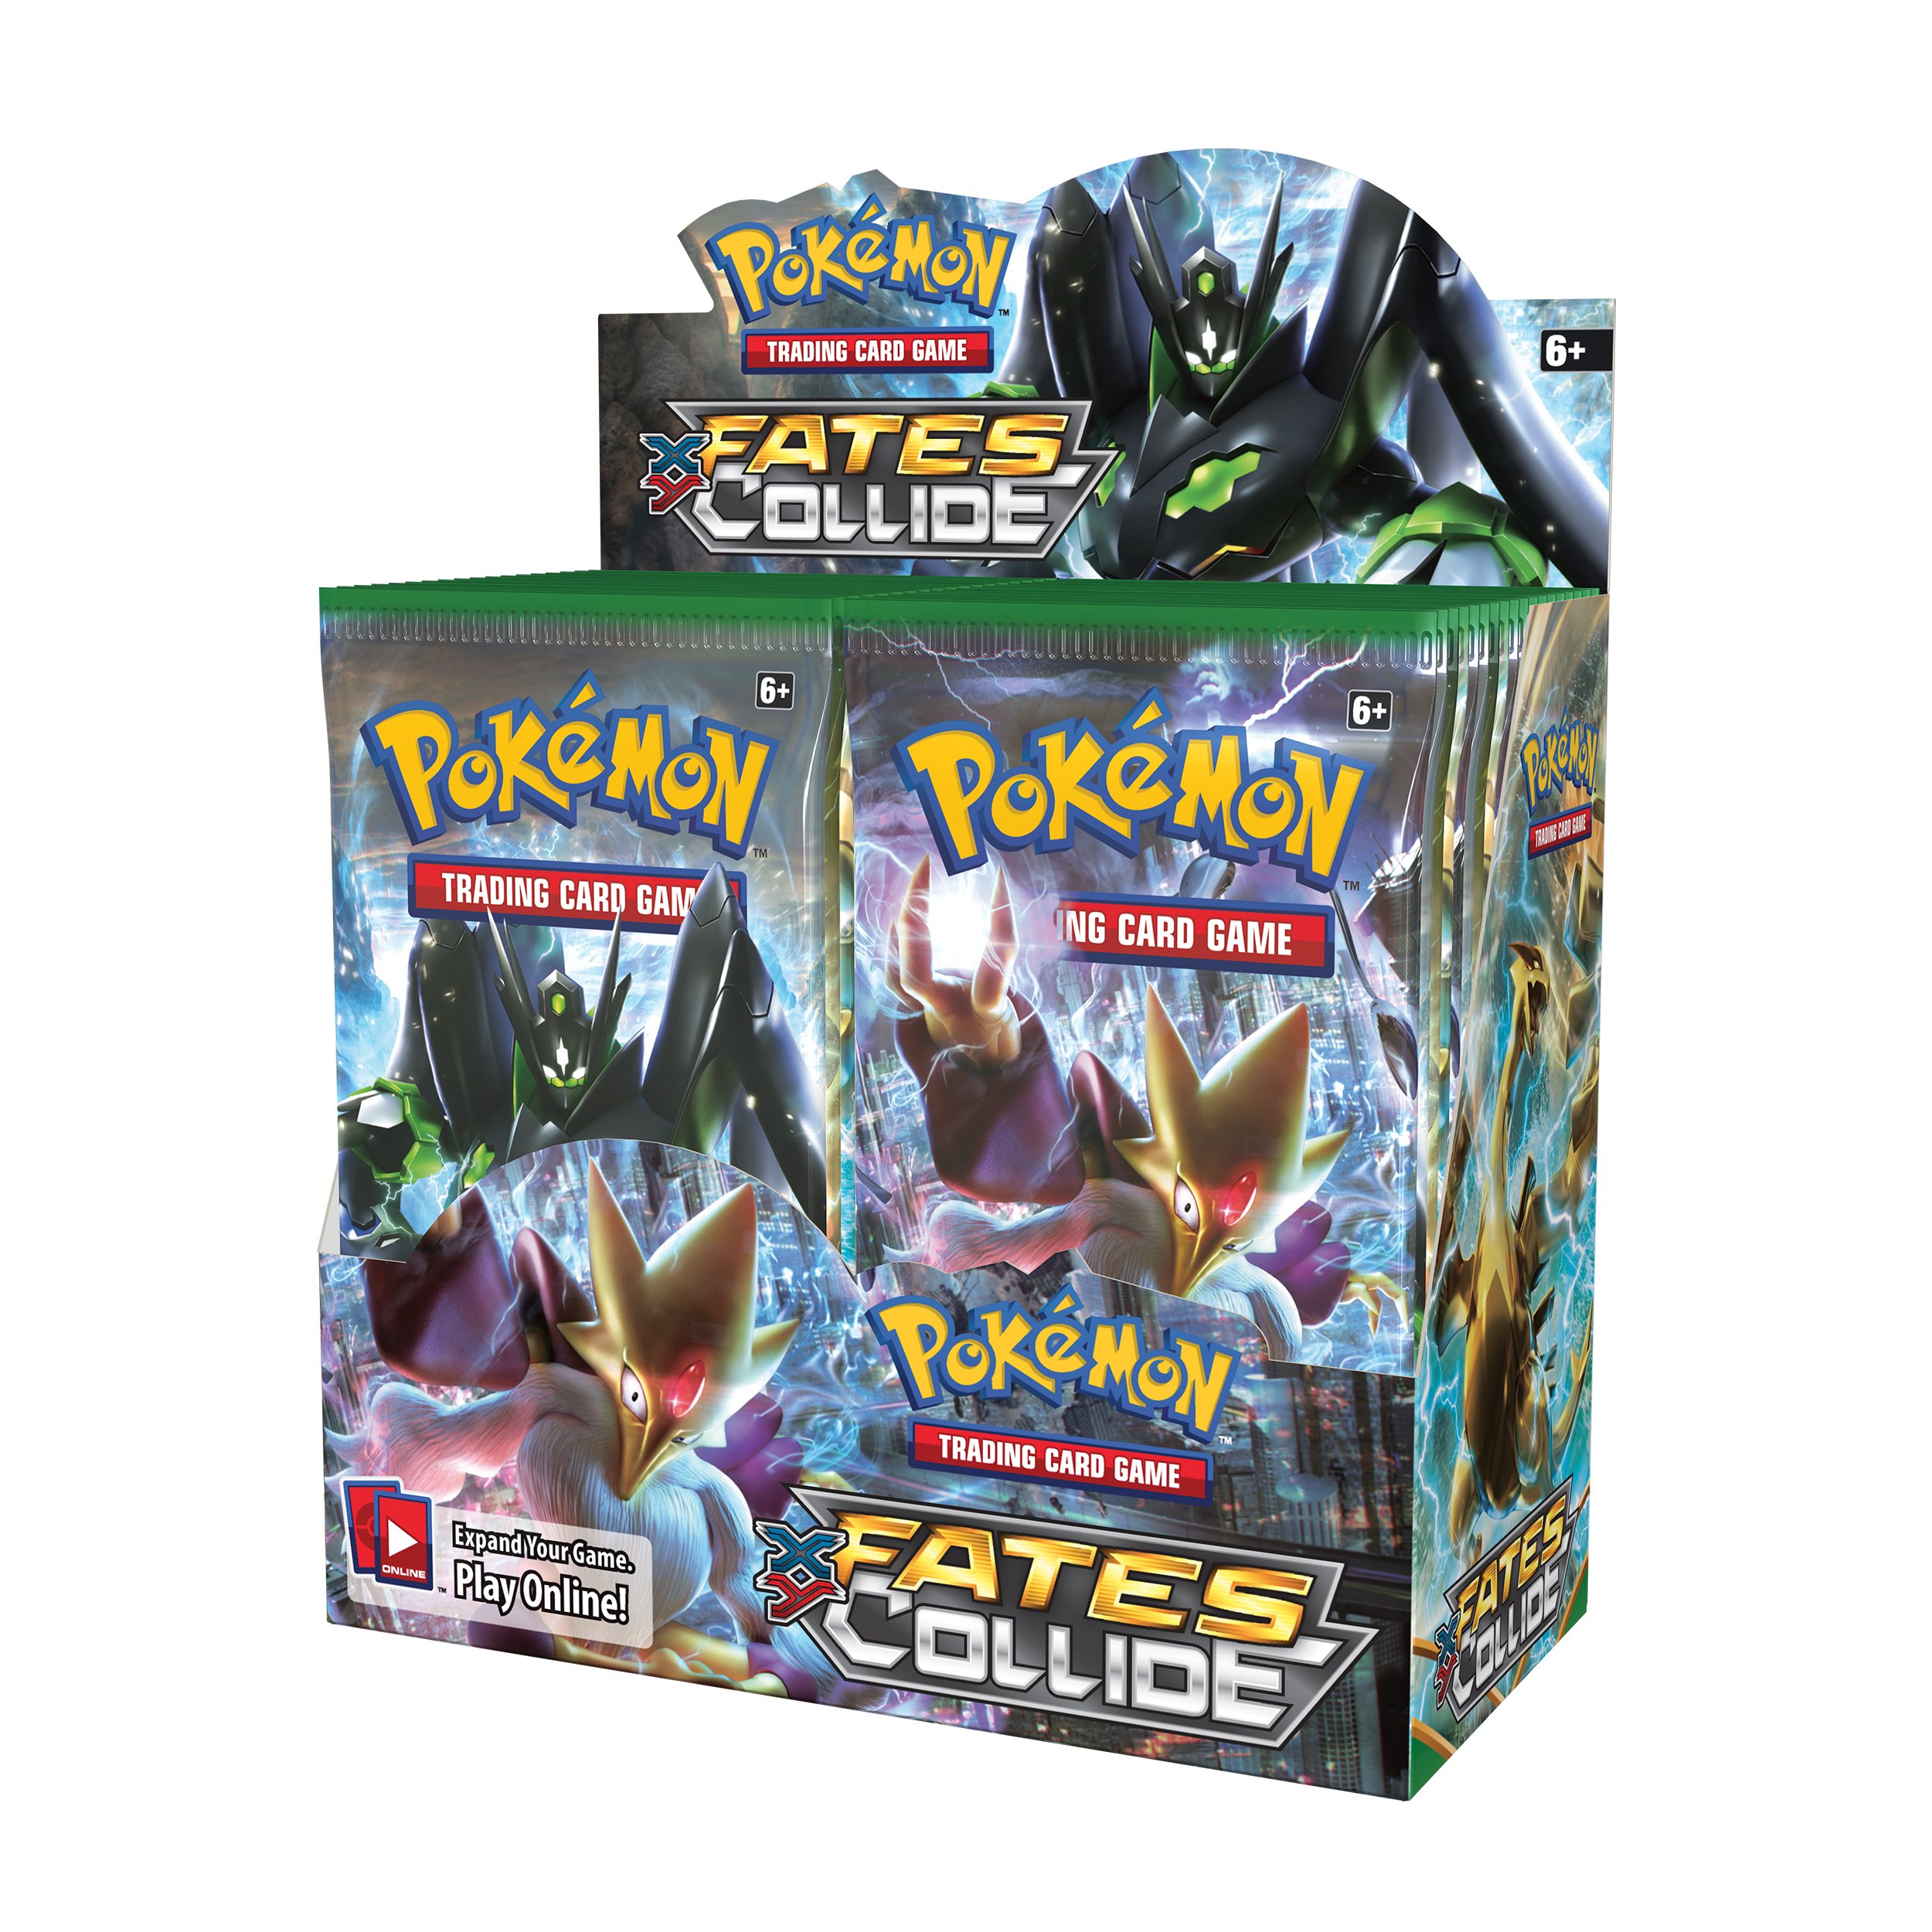 POKEMON XY FATES COLLIDE BOOSTER BOX BLOWOUT CARDS